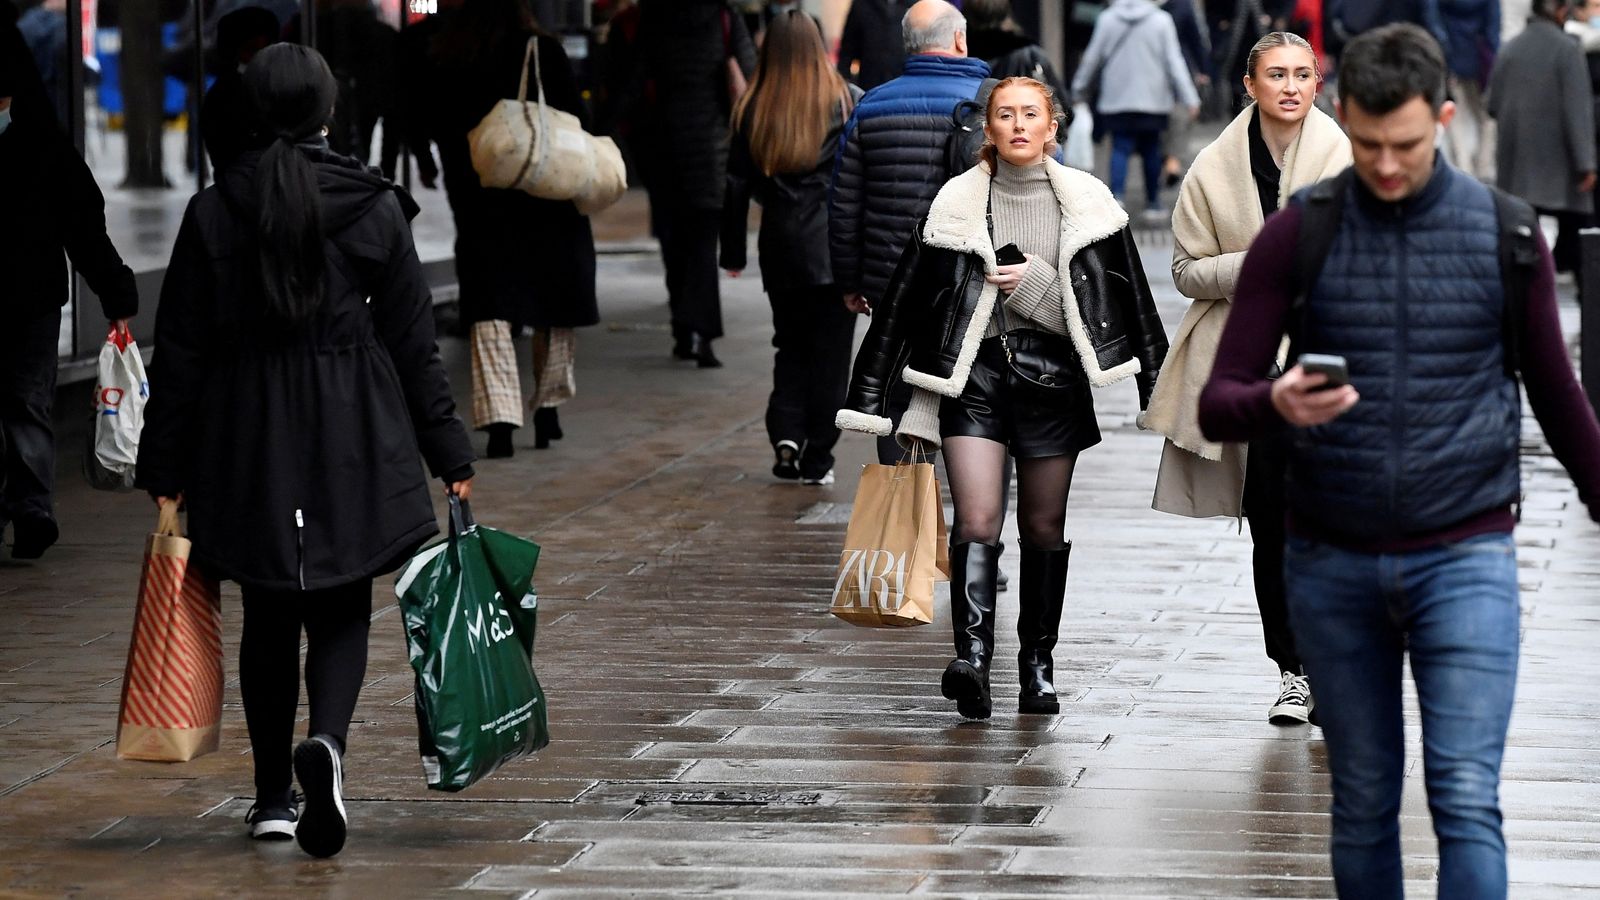 First step towards recession as economy shrinks, official GDP figures show